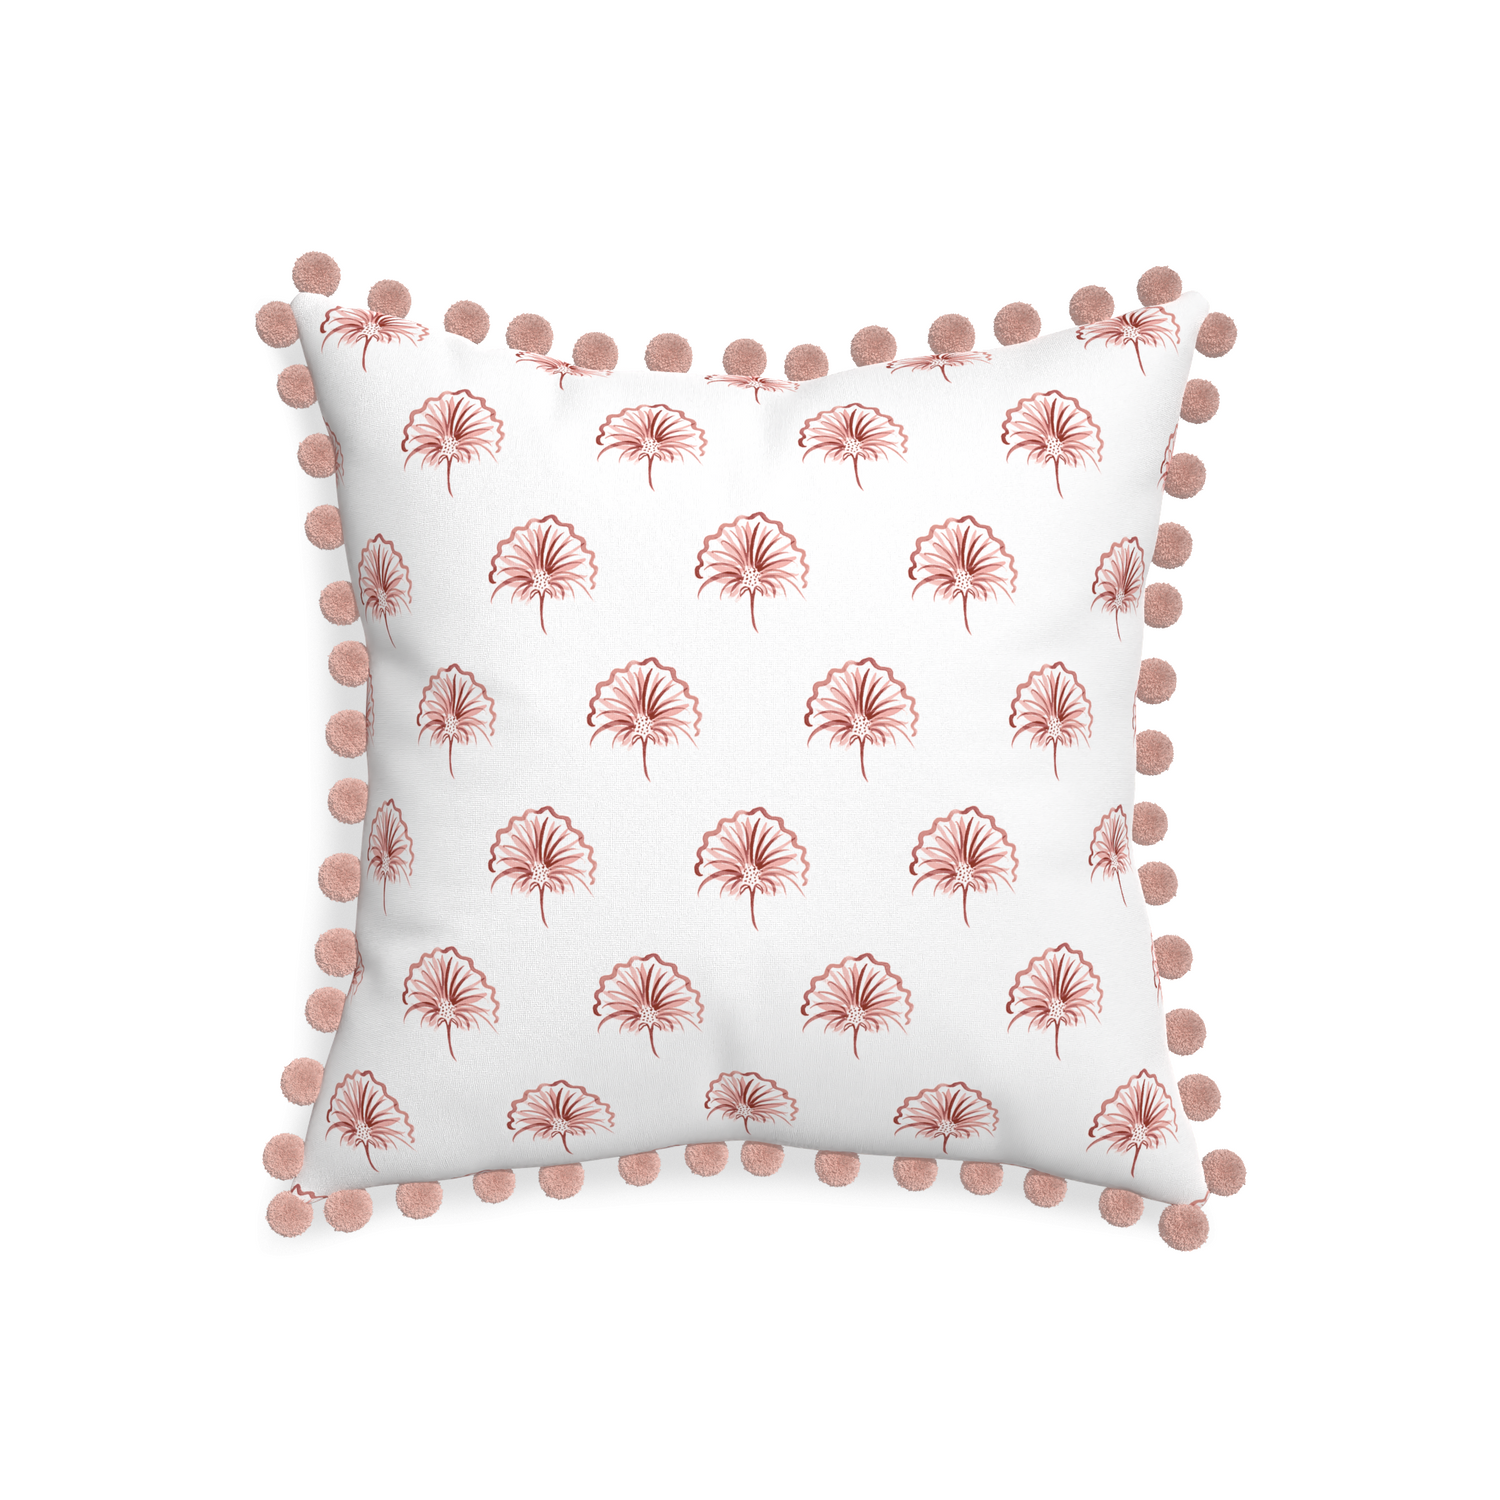 20-square penelope rose custom floral pinkpillow with rose pom pom on white background